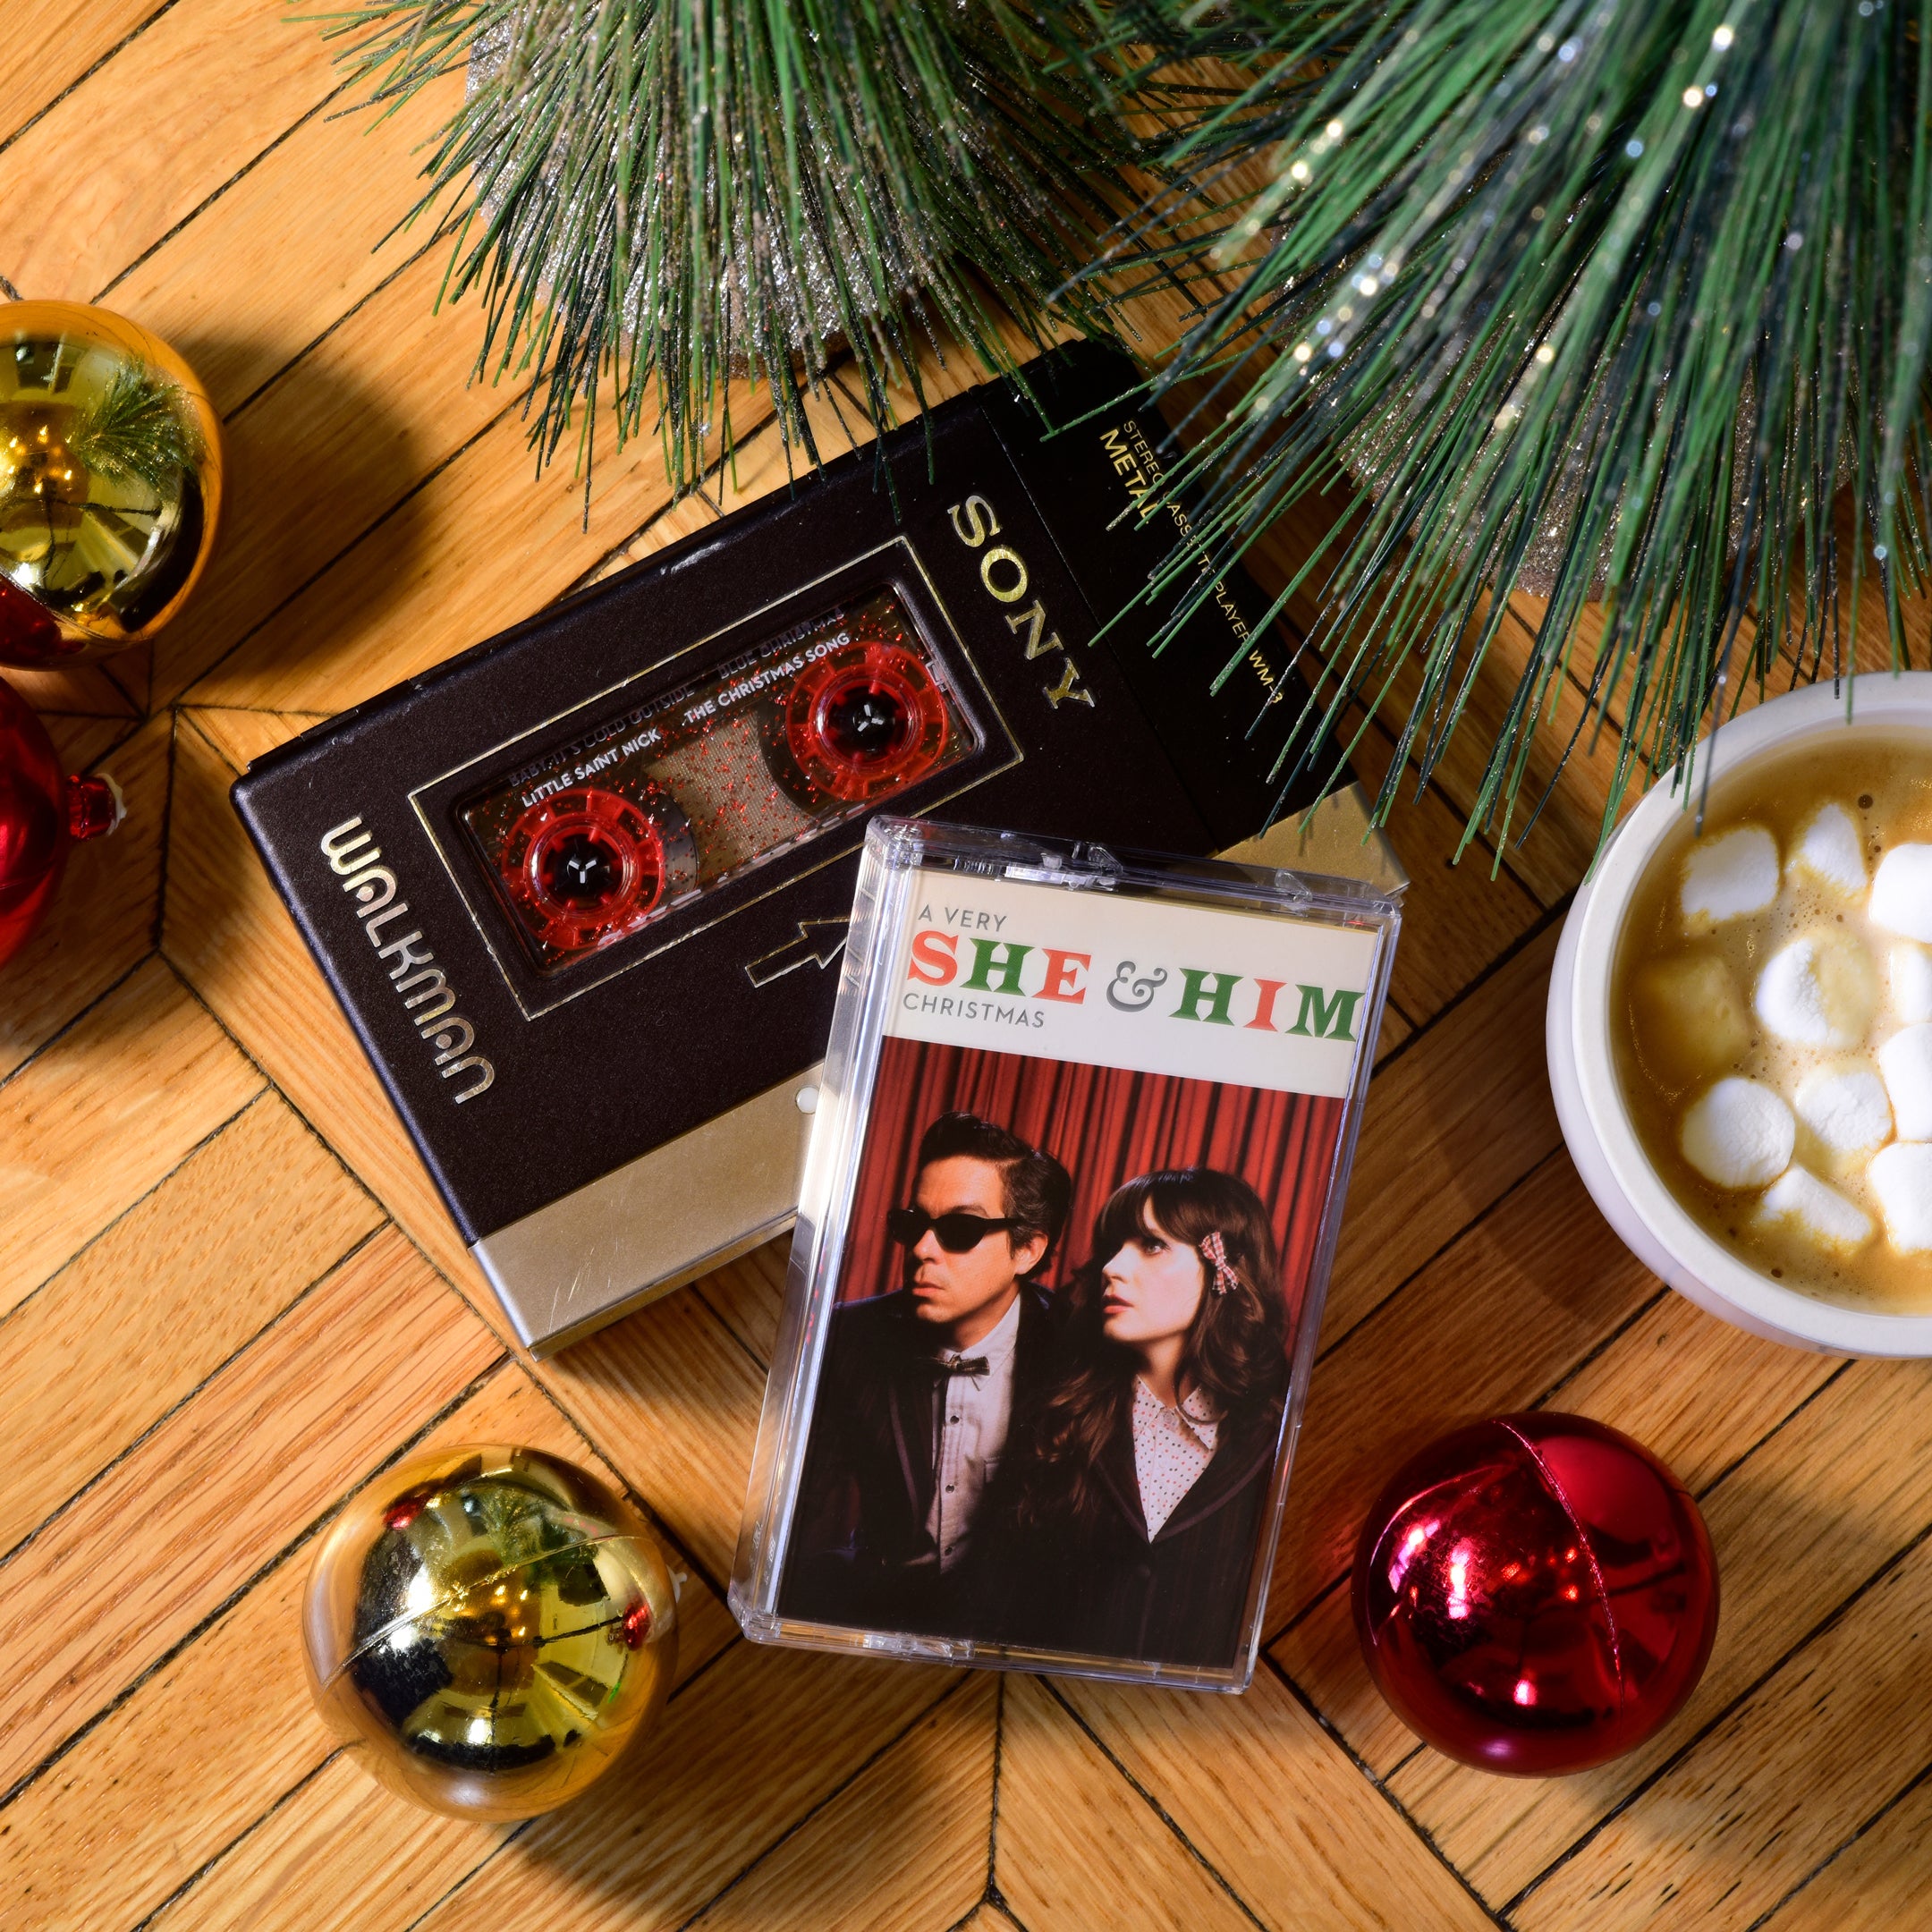 Celebrate Christmas on cassette with She & Him